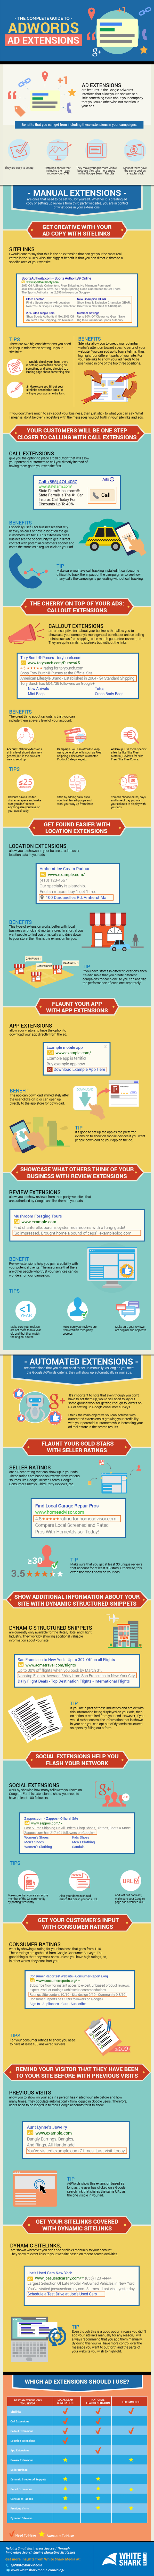 the_complete_guide_to_adwords_ad_extensions_infographic-1